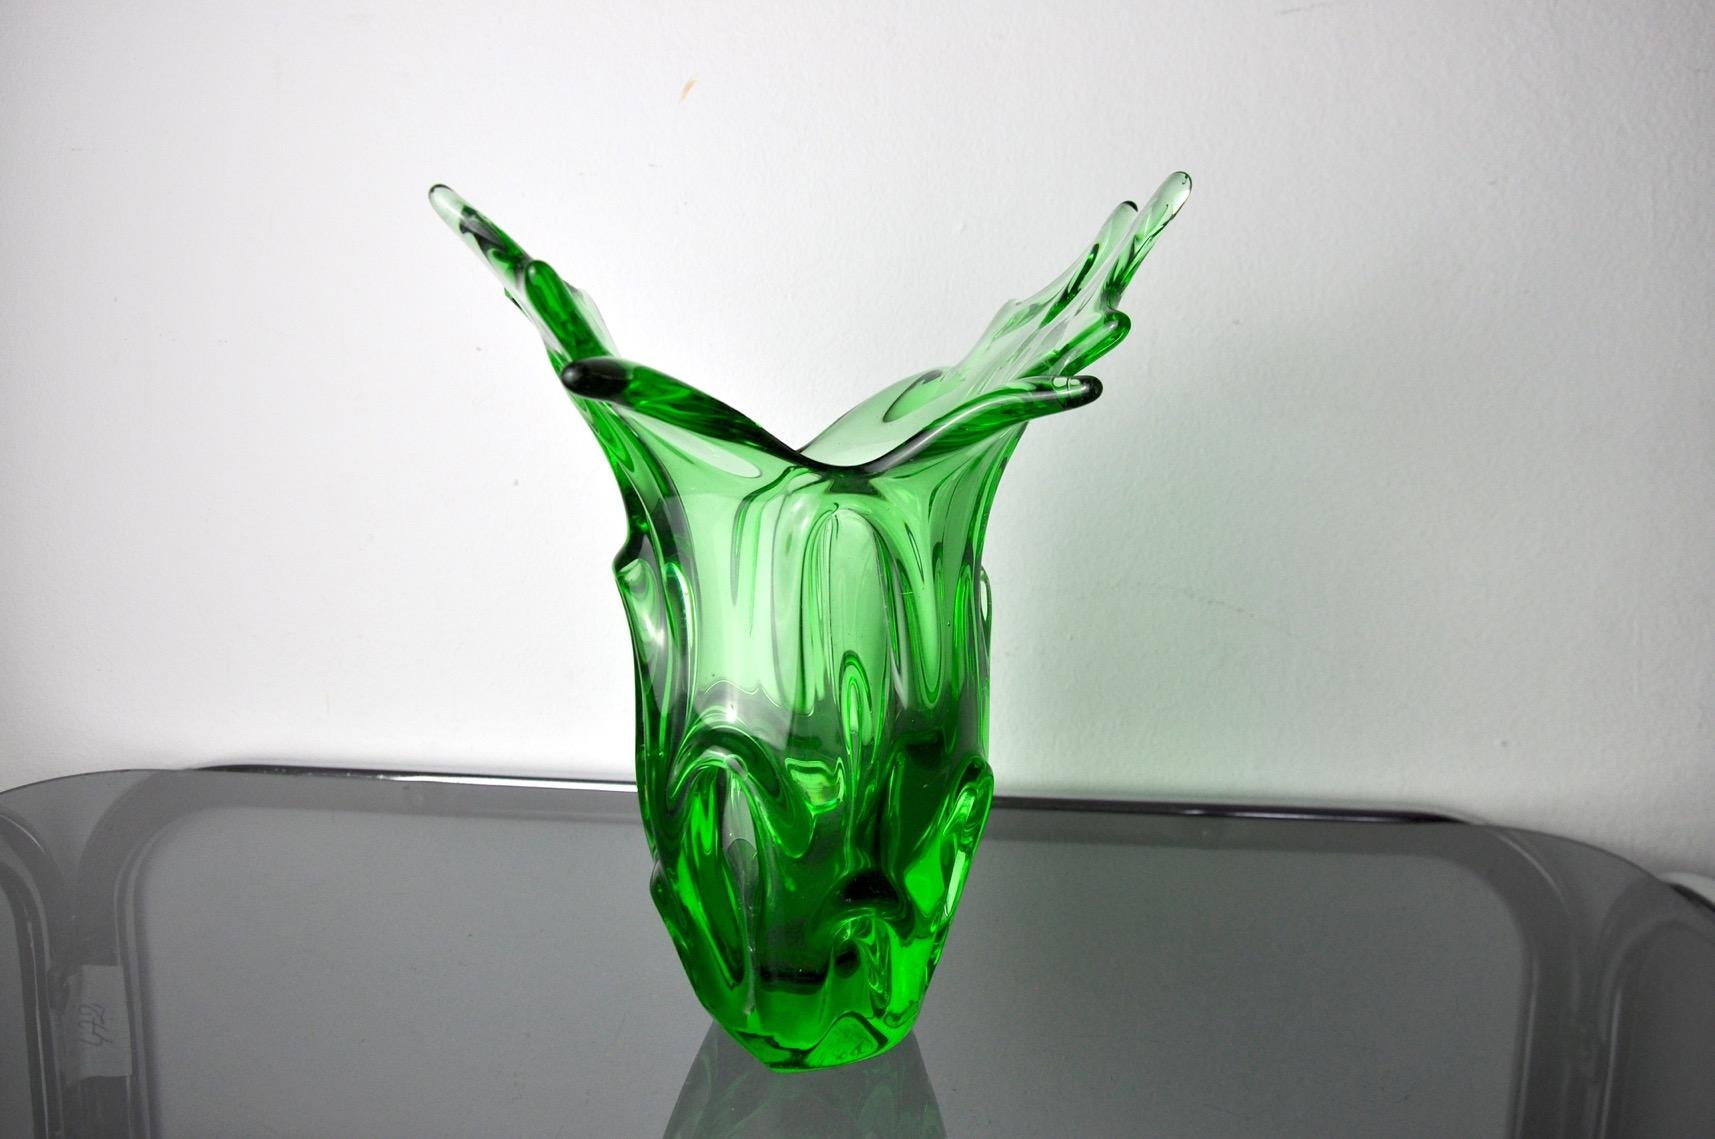 Hand blown sommerso green Italian art glass vase. Attributed to seguso, murano italy, 1960s. This colorful vase has a beautiful design with drawn details and a ribbed edge using the sommerso technique. Use it as a decorative vase or centerpiece.